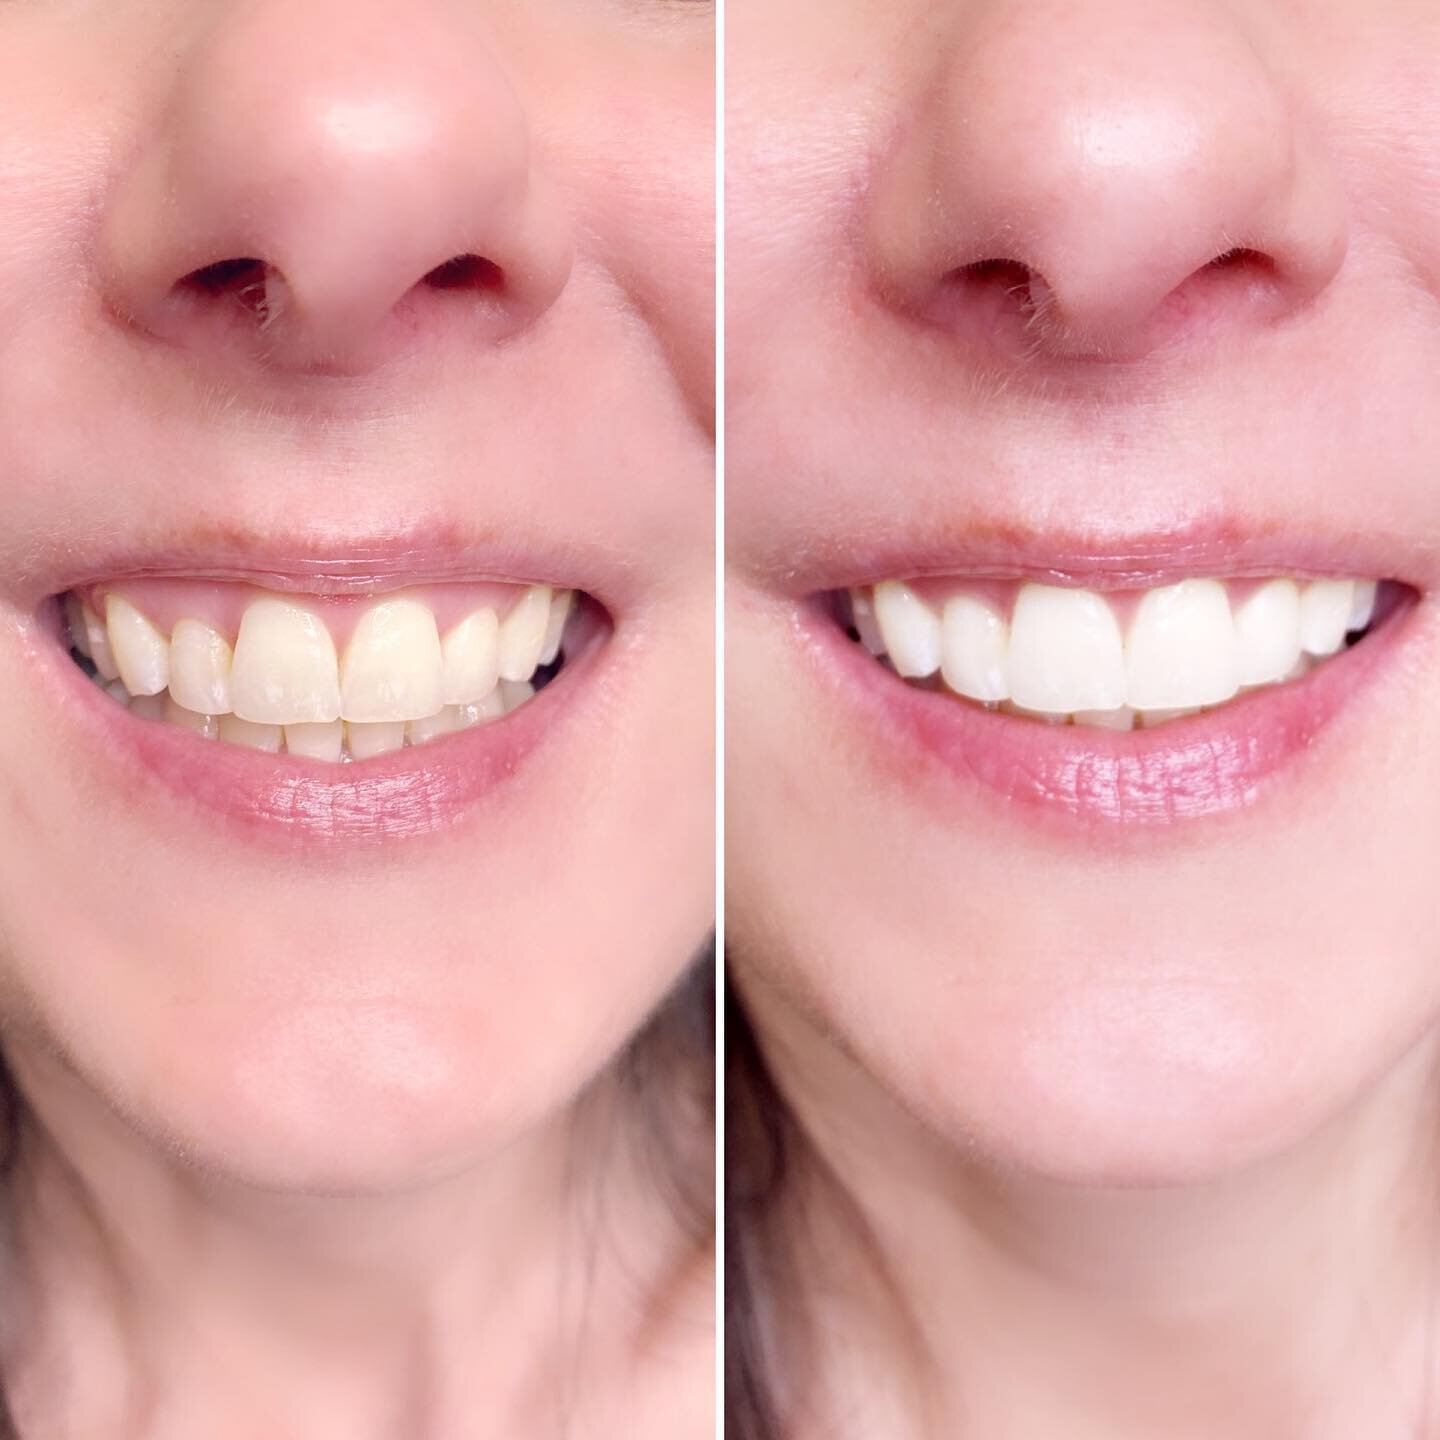 Shine on, with your pearly whites!  Teeth whitening with NO SENSITIVITY or ZINGERS?! You bet!  This client jumped 8 shades in just ONE session at REVEAL Beauty Spa.  DM us to schedule the start of your  brightened smile 😁

#teethwhitening #smile #br